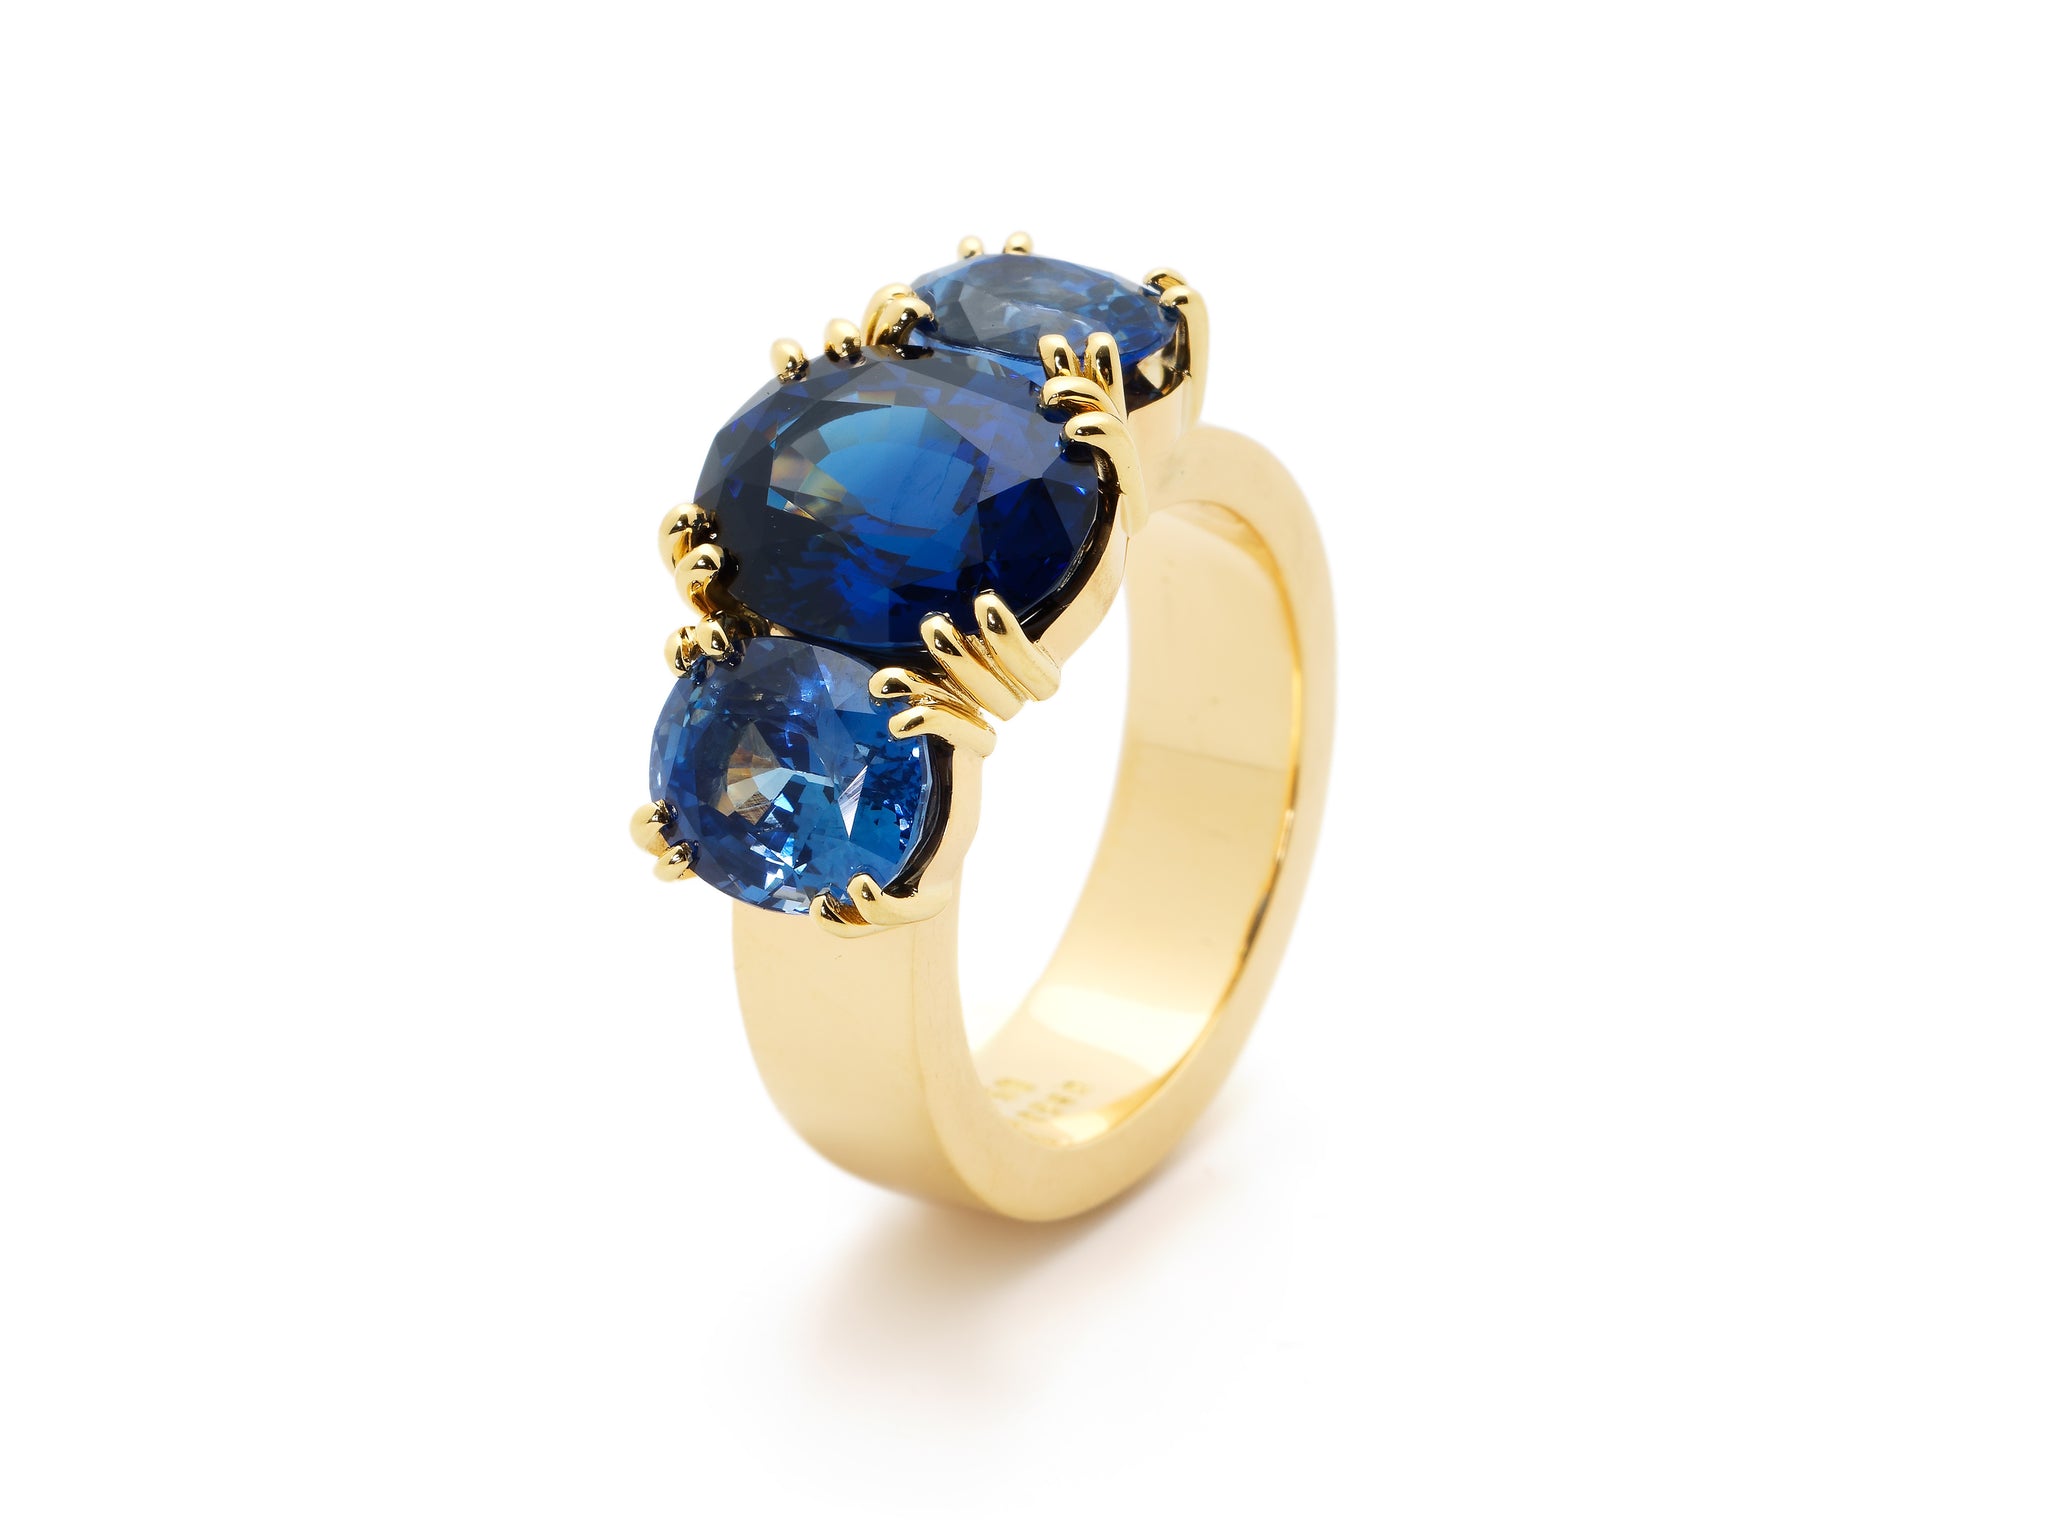 18 krt yellow gold ring set with 3 oval blue Sapphires